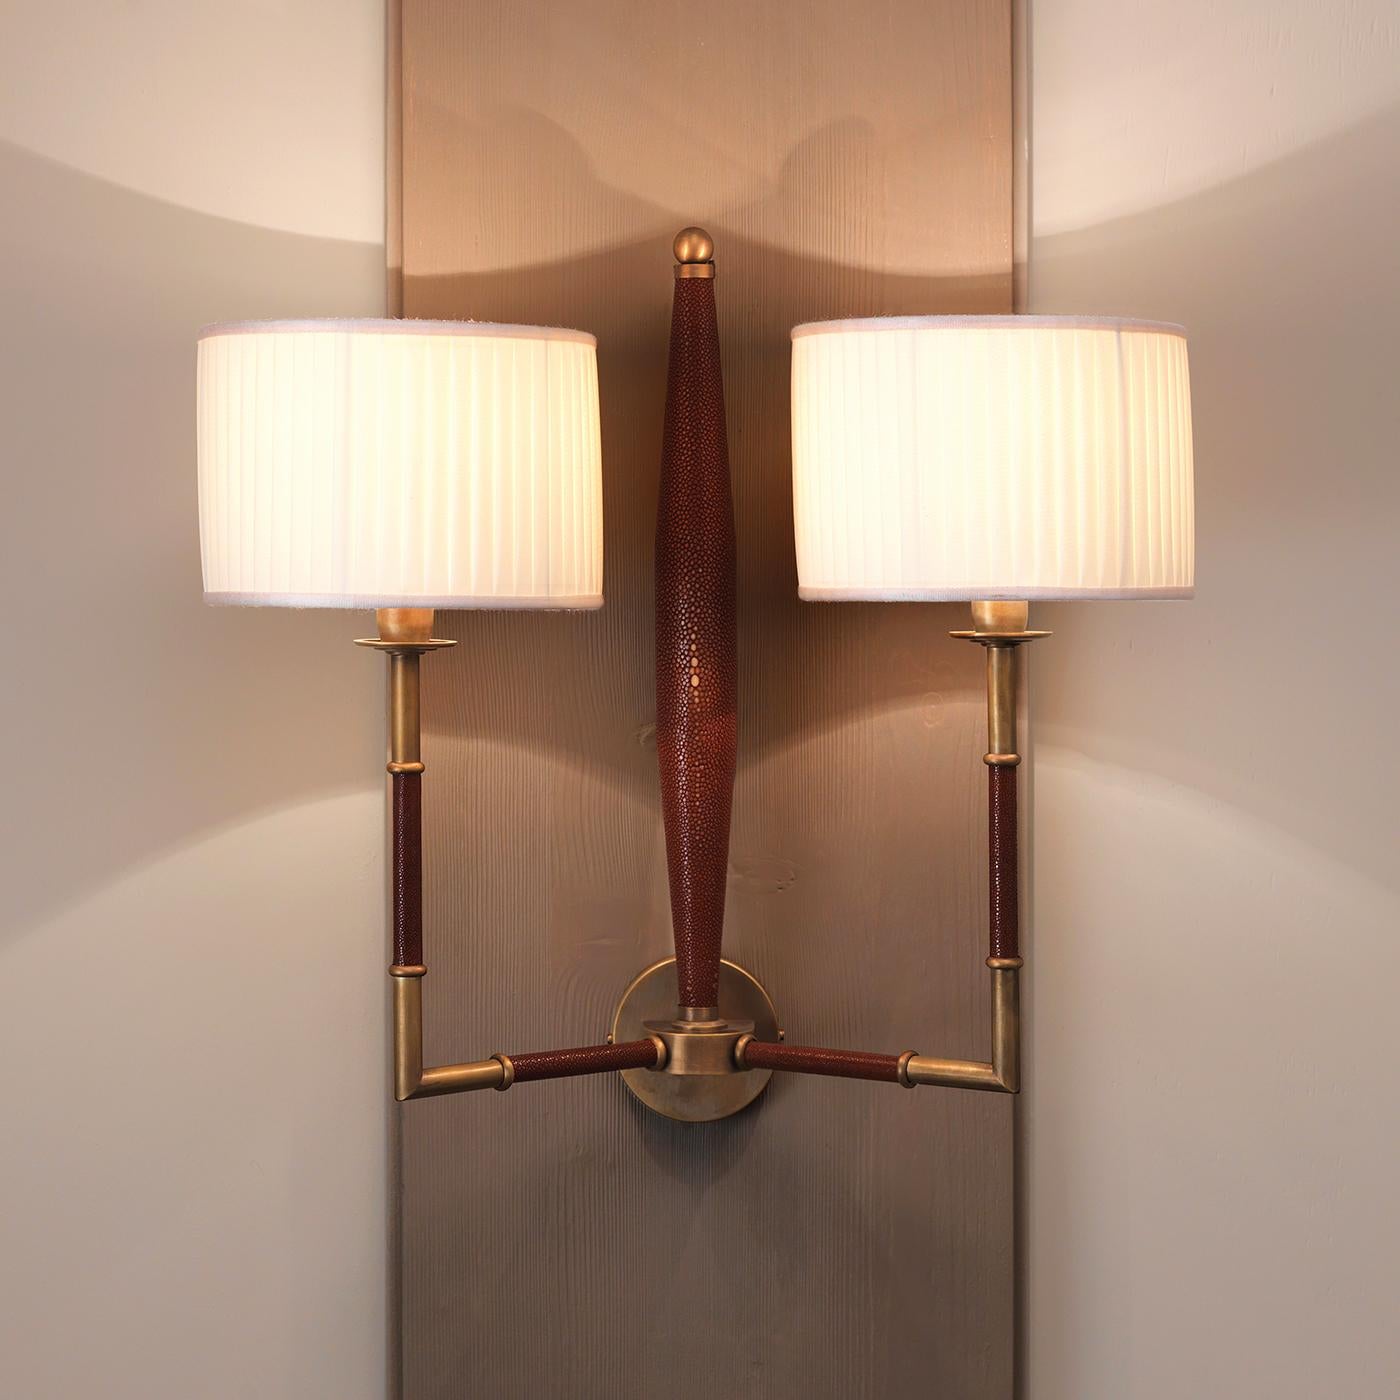 A striking combination of stunning materials and textures enlivens the rigorous silhouette of this elegant sconce designed by Ciarmoli Queda Studio. The brass structure comprises a central circle supporting two functional arms and a decorative one